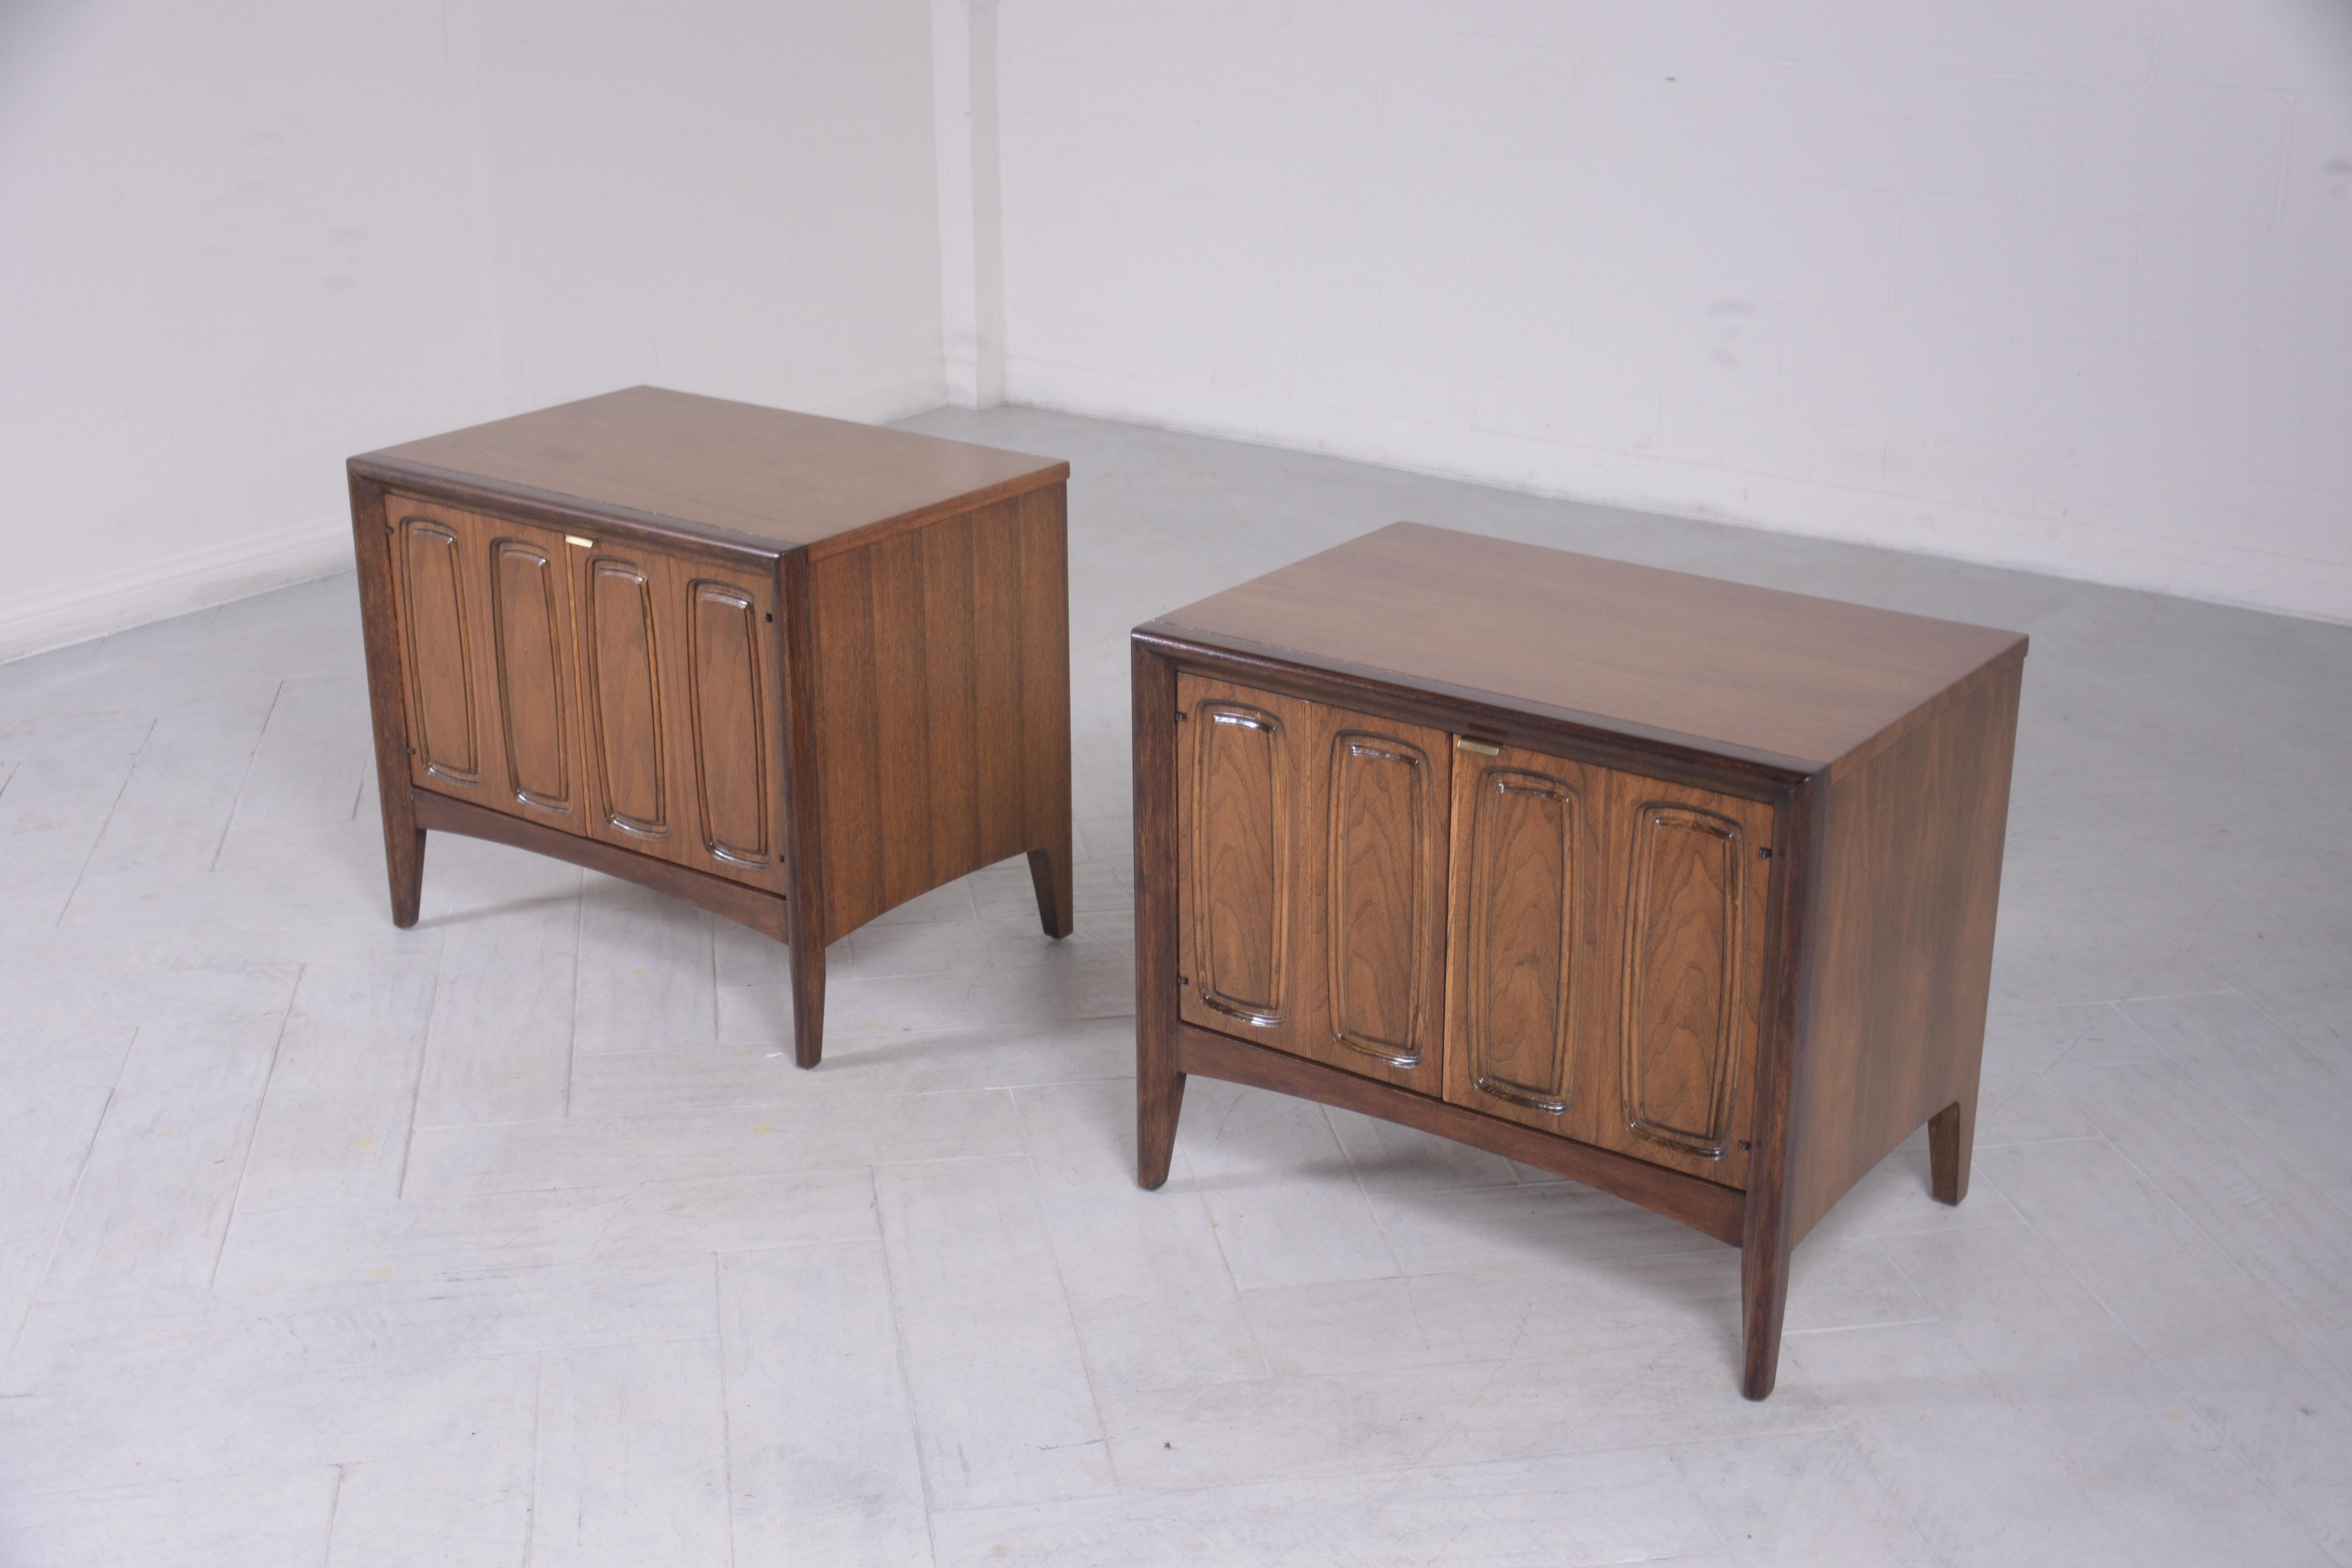 Refined Vintage 1960s Walnut Nightstands: Mid-Century Modern Elegance Restored In Good Condition For Sale In Los Angeles, CA